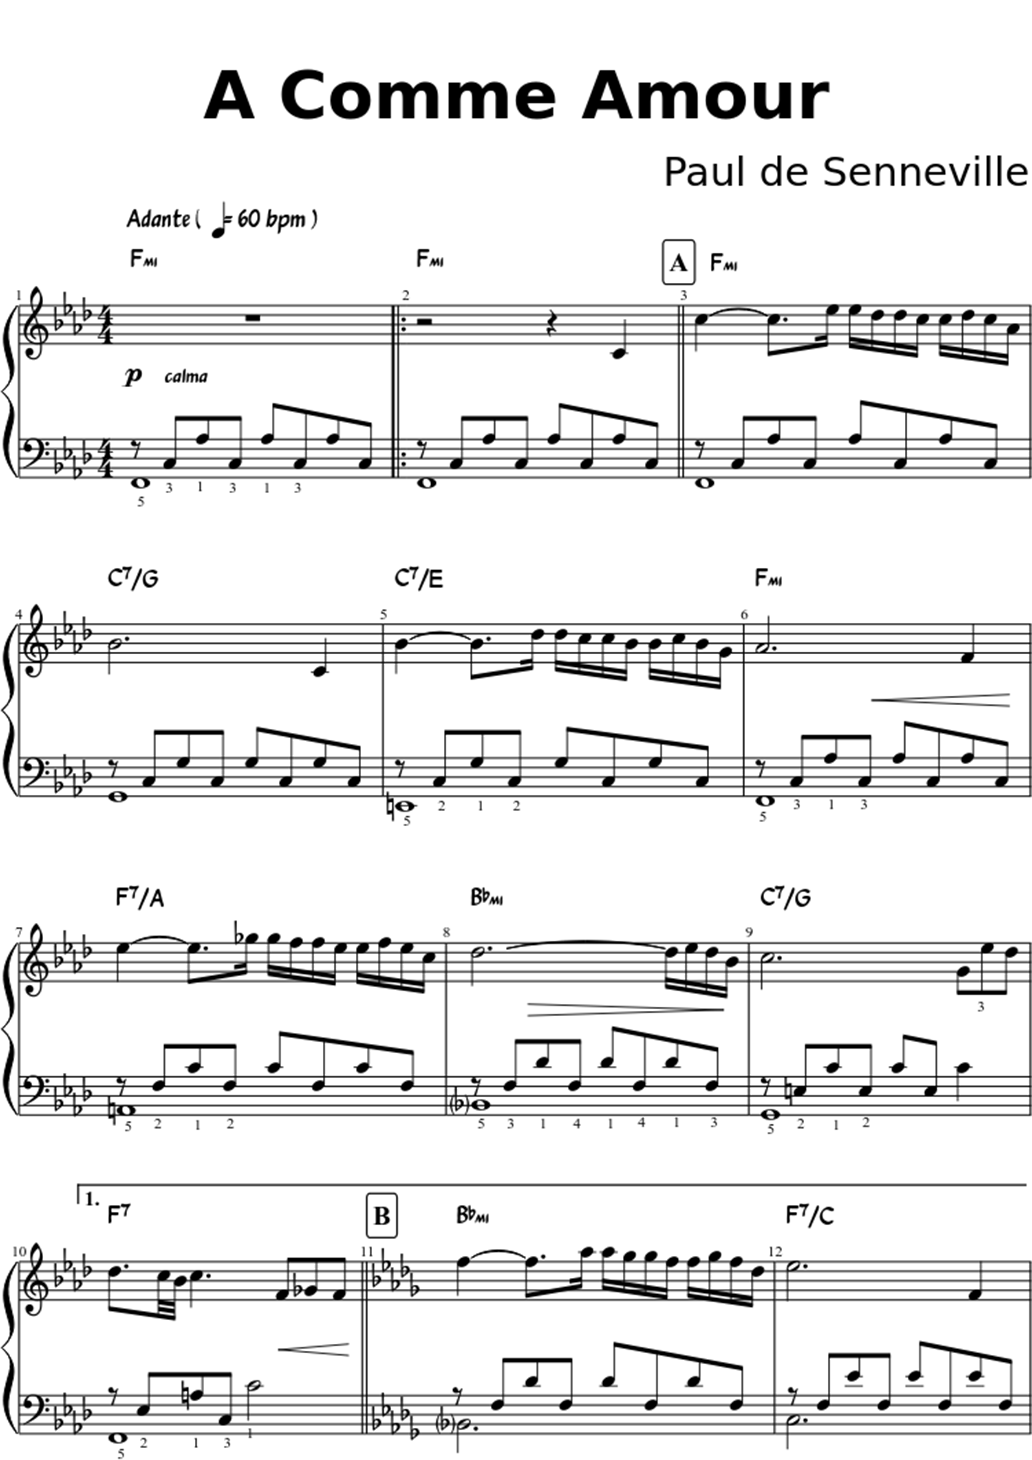 A comme amour sheet music notes 1